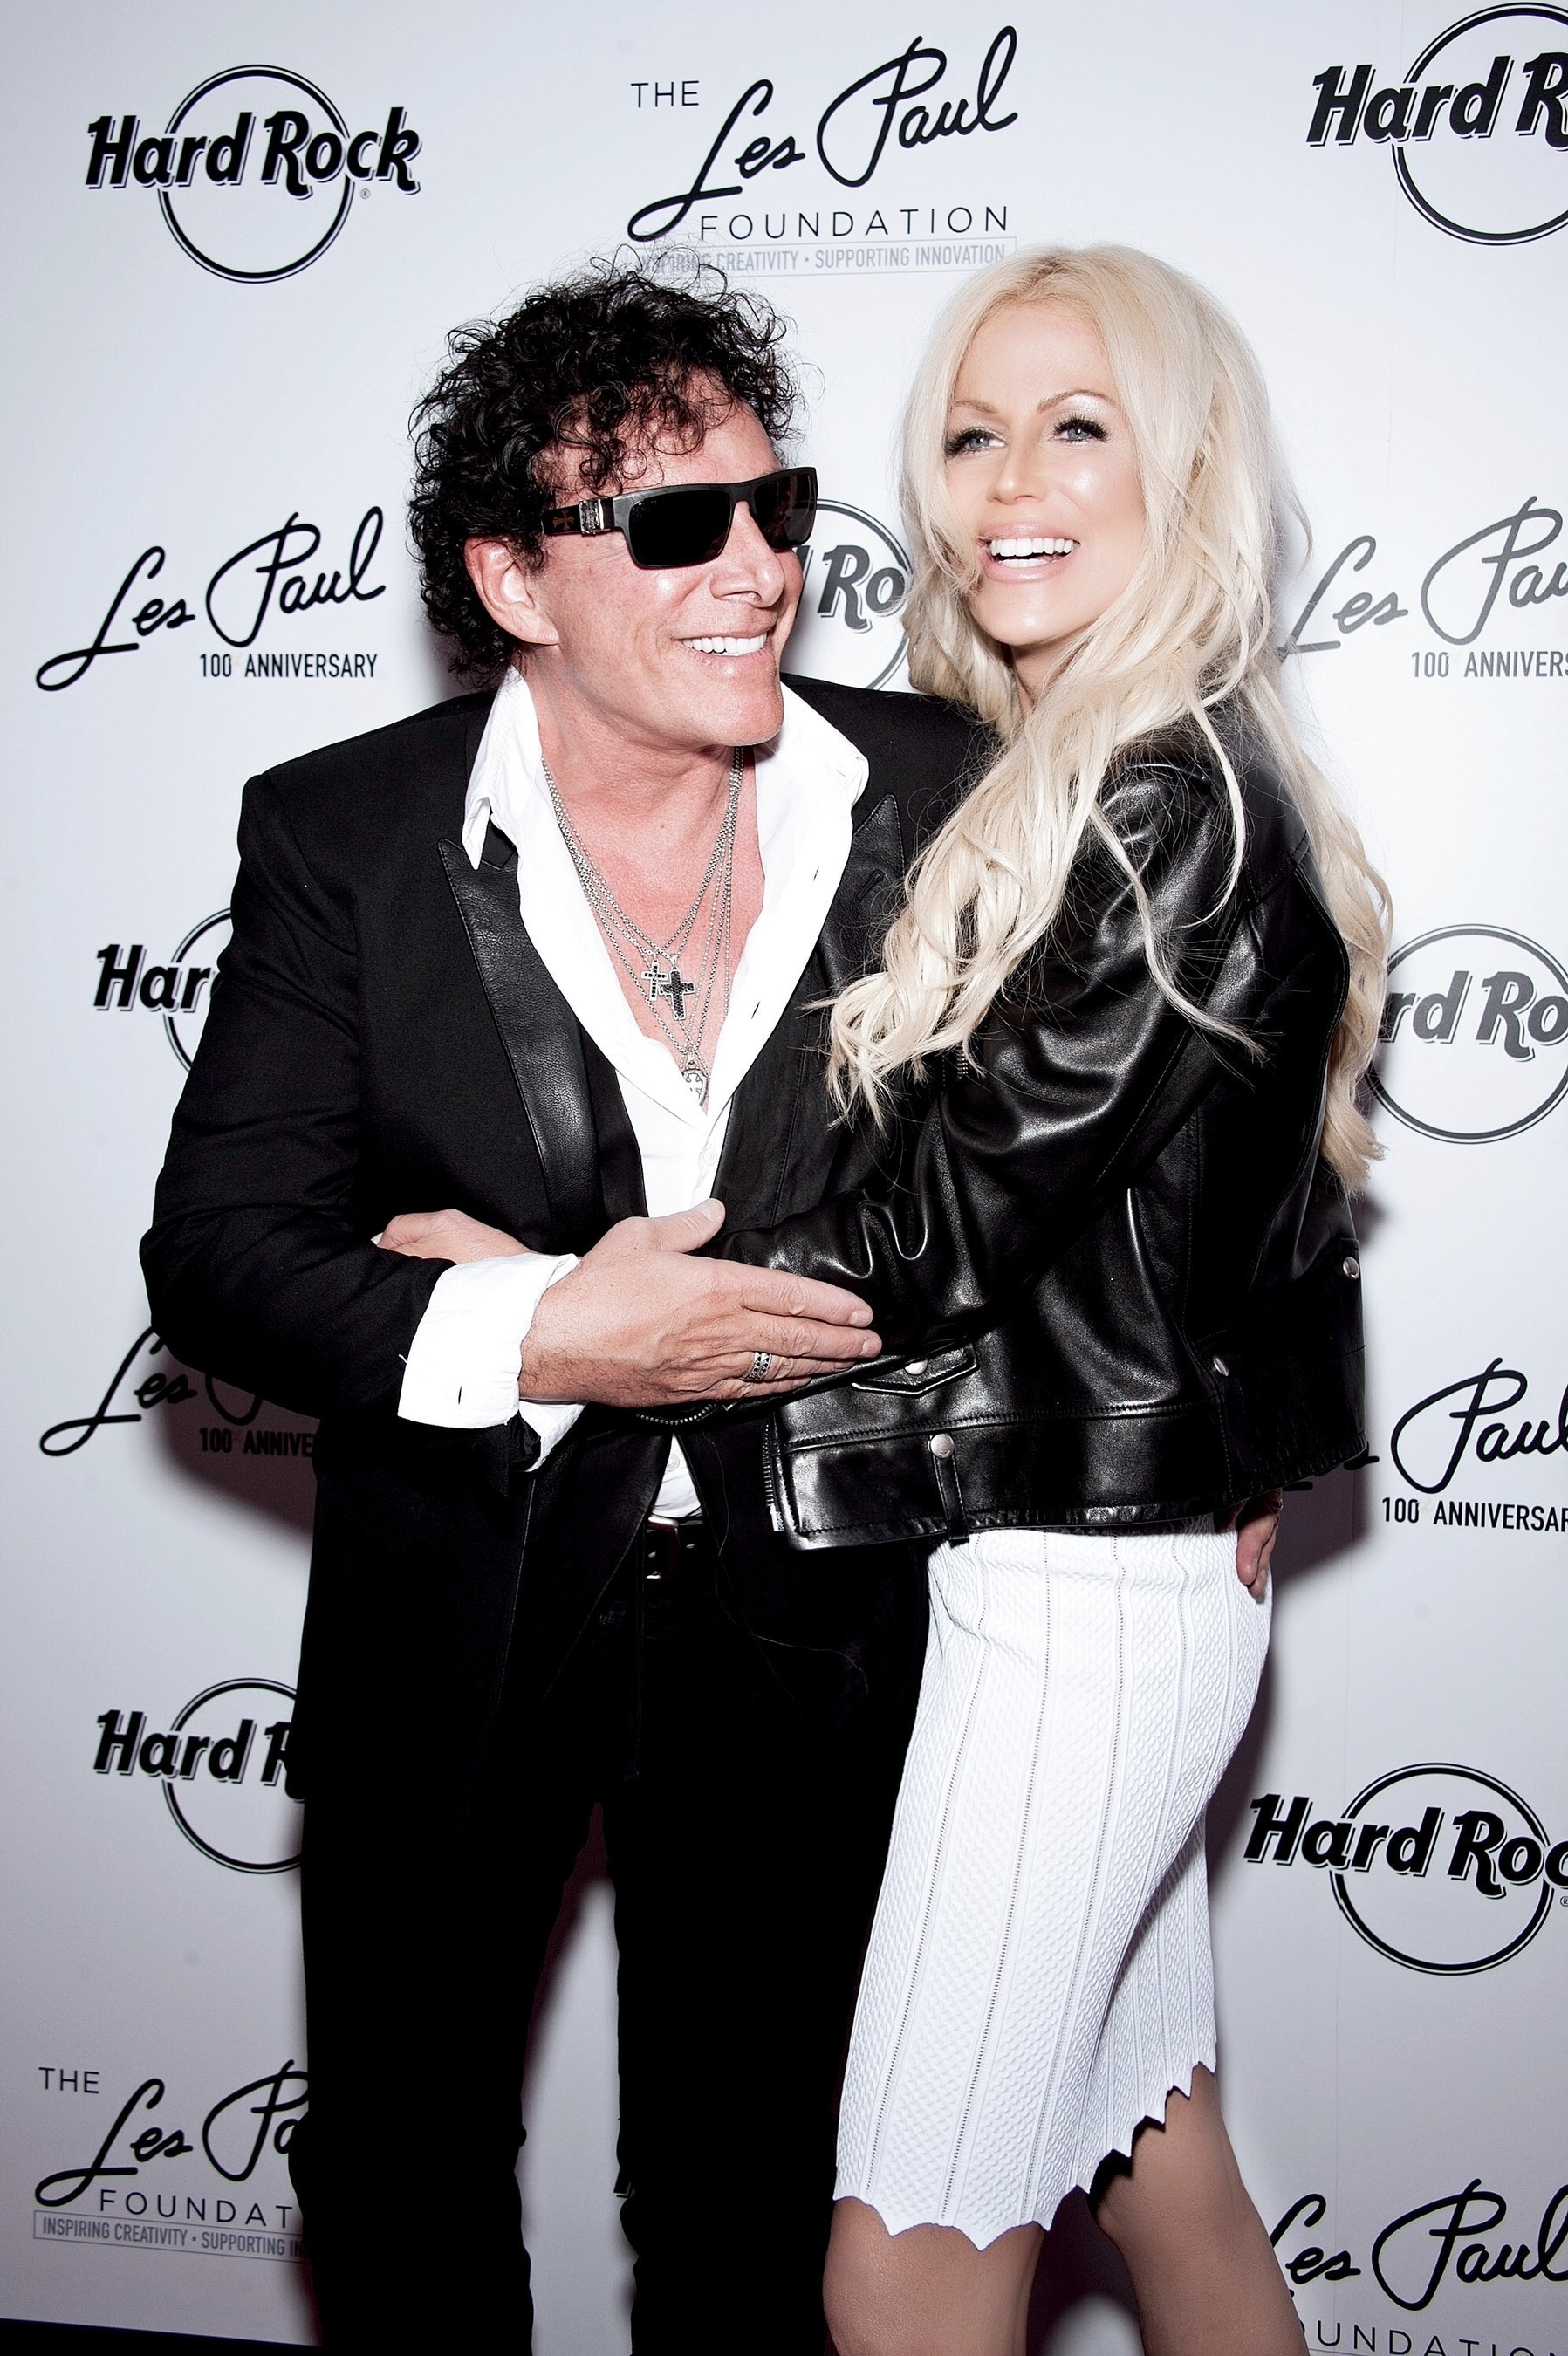 Neal Schon (L) and wife Michaele Schon attend Les Paul's 100th Anniversary Celebration at the Hard Rock Cafe - Times Square on June 9, 2015 in New York City.